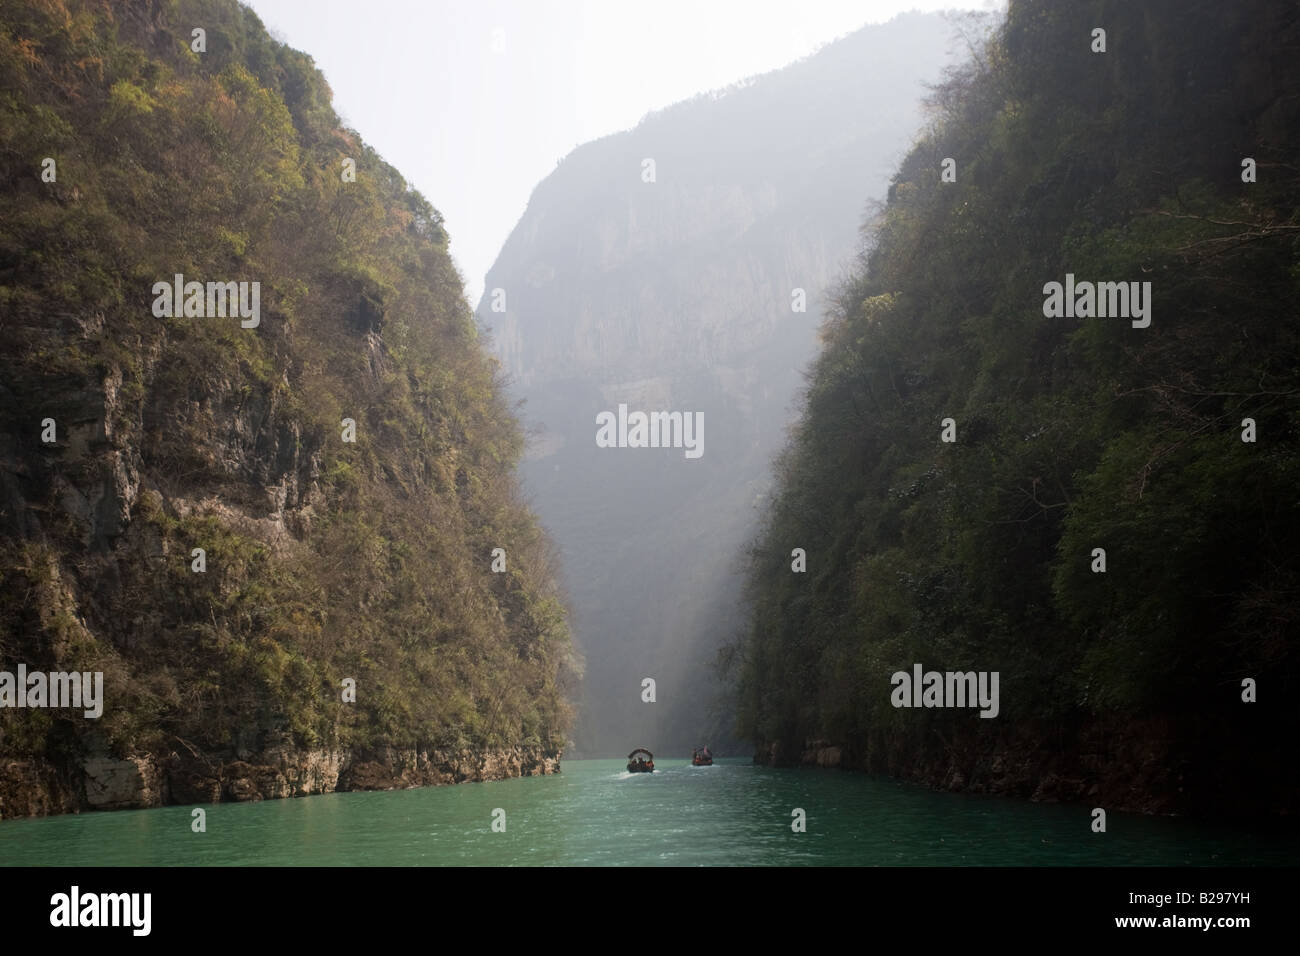 Emerald Gorge one of the Lesser Gorges on the Daning River off the Yangtze River China Stock Photo